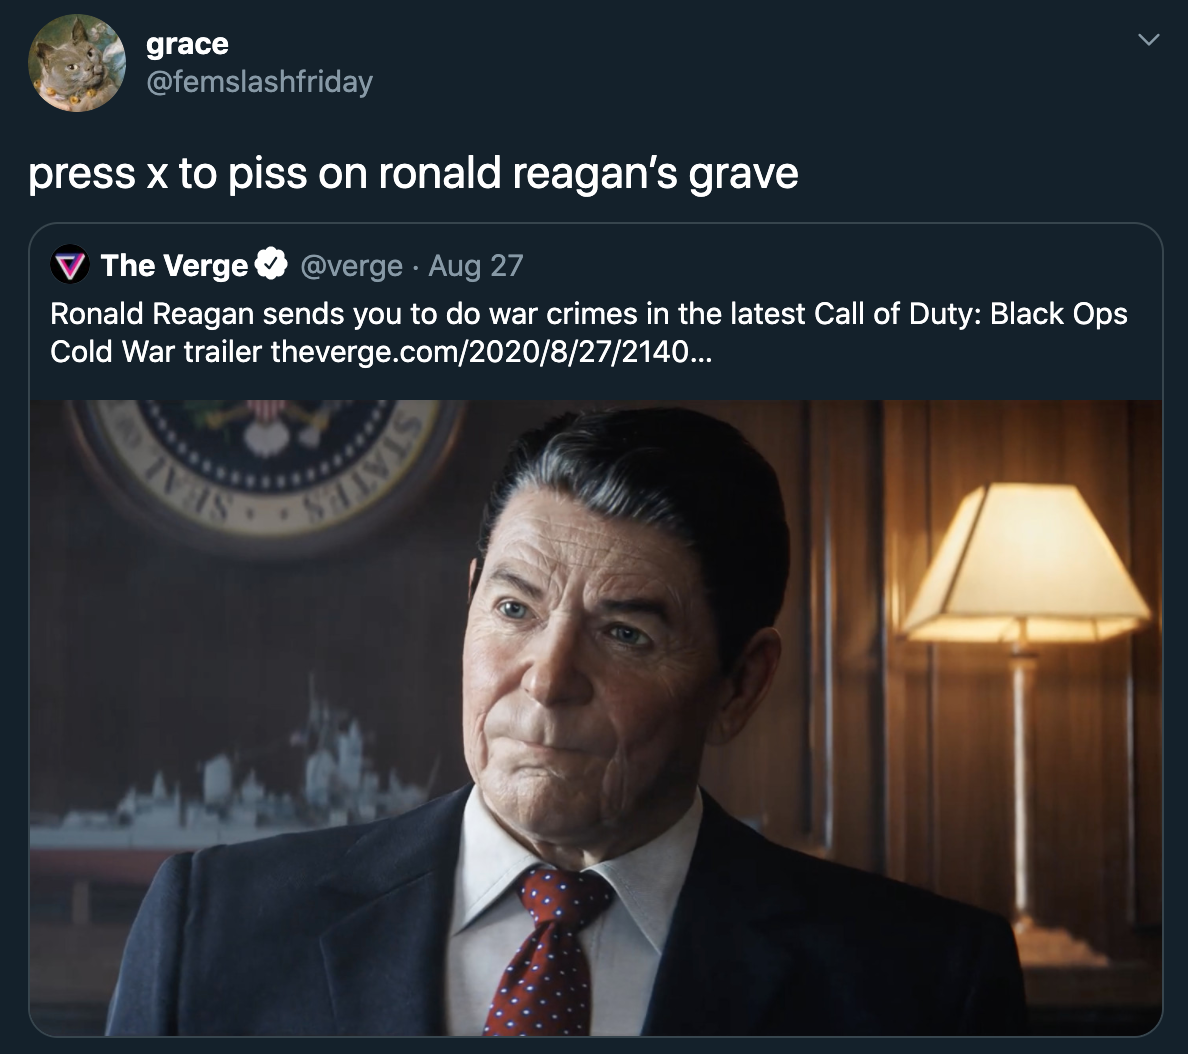 press x to piss on ronald reagan's grave